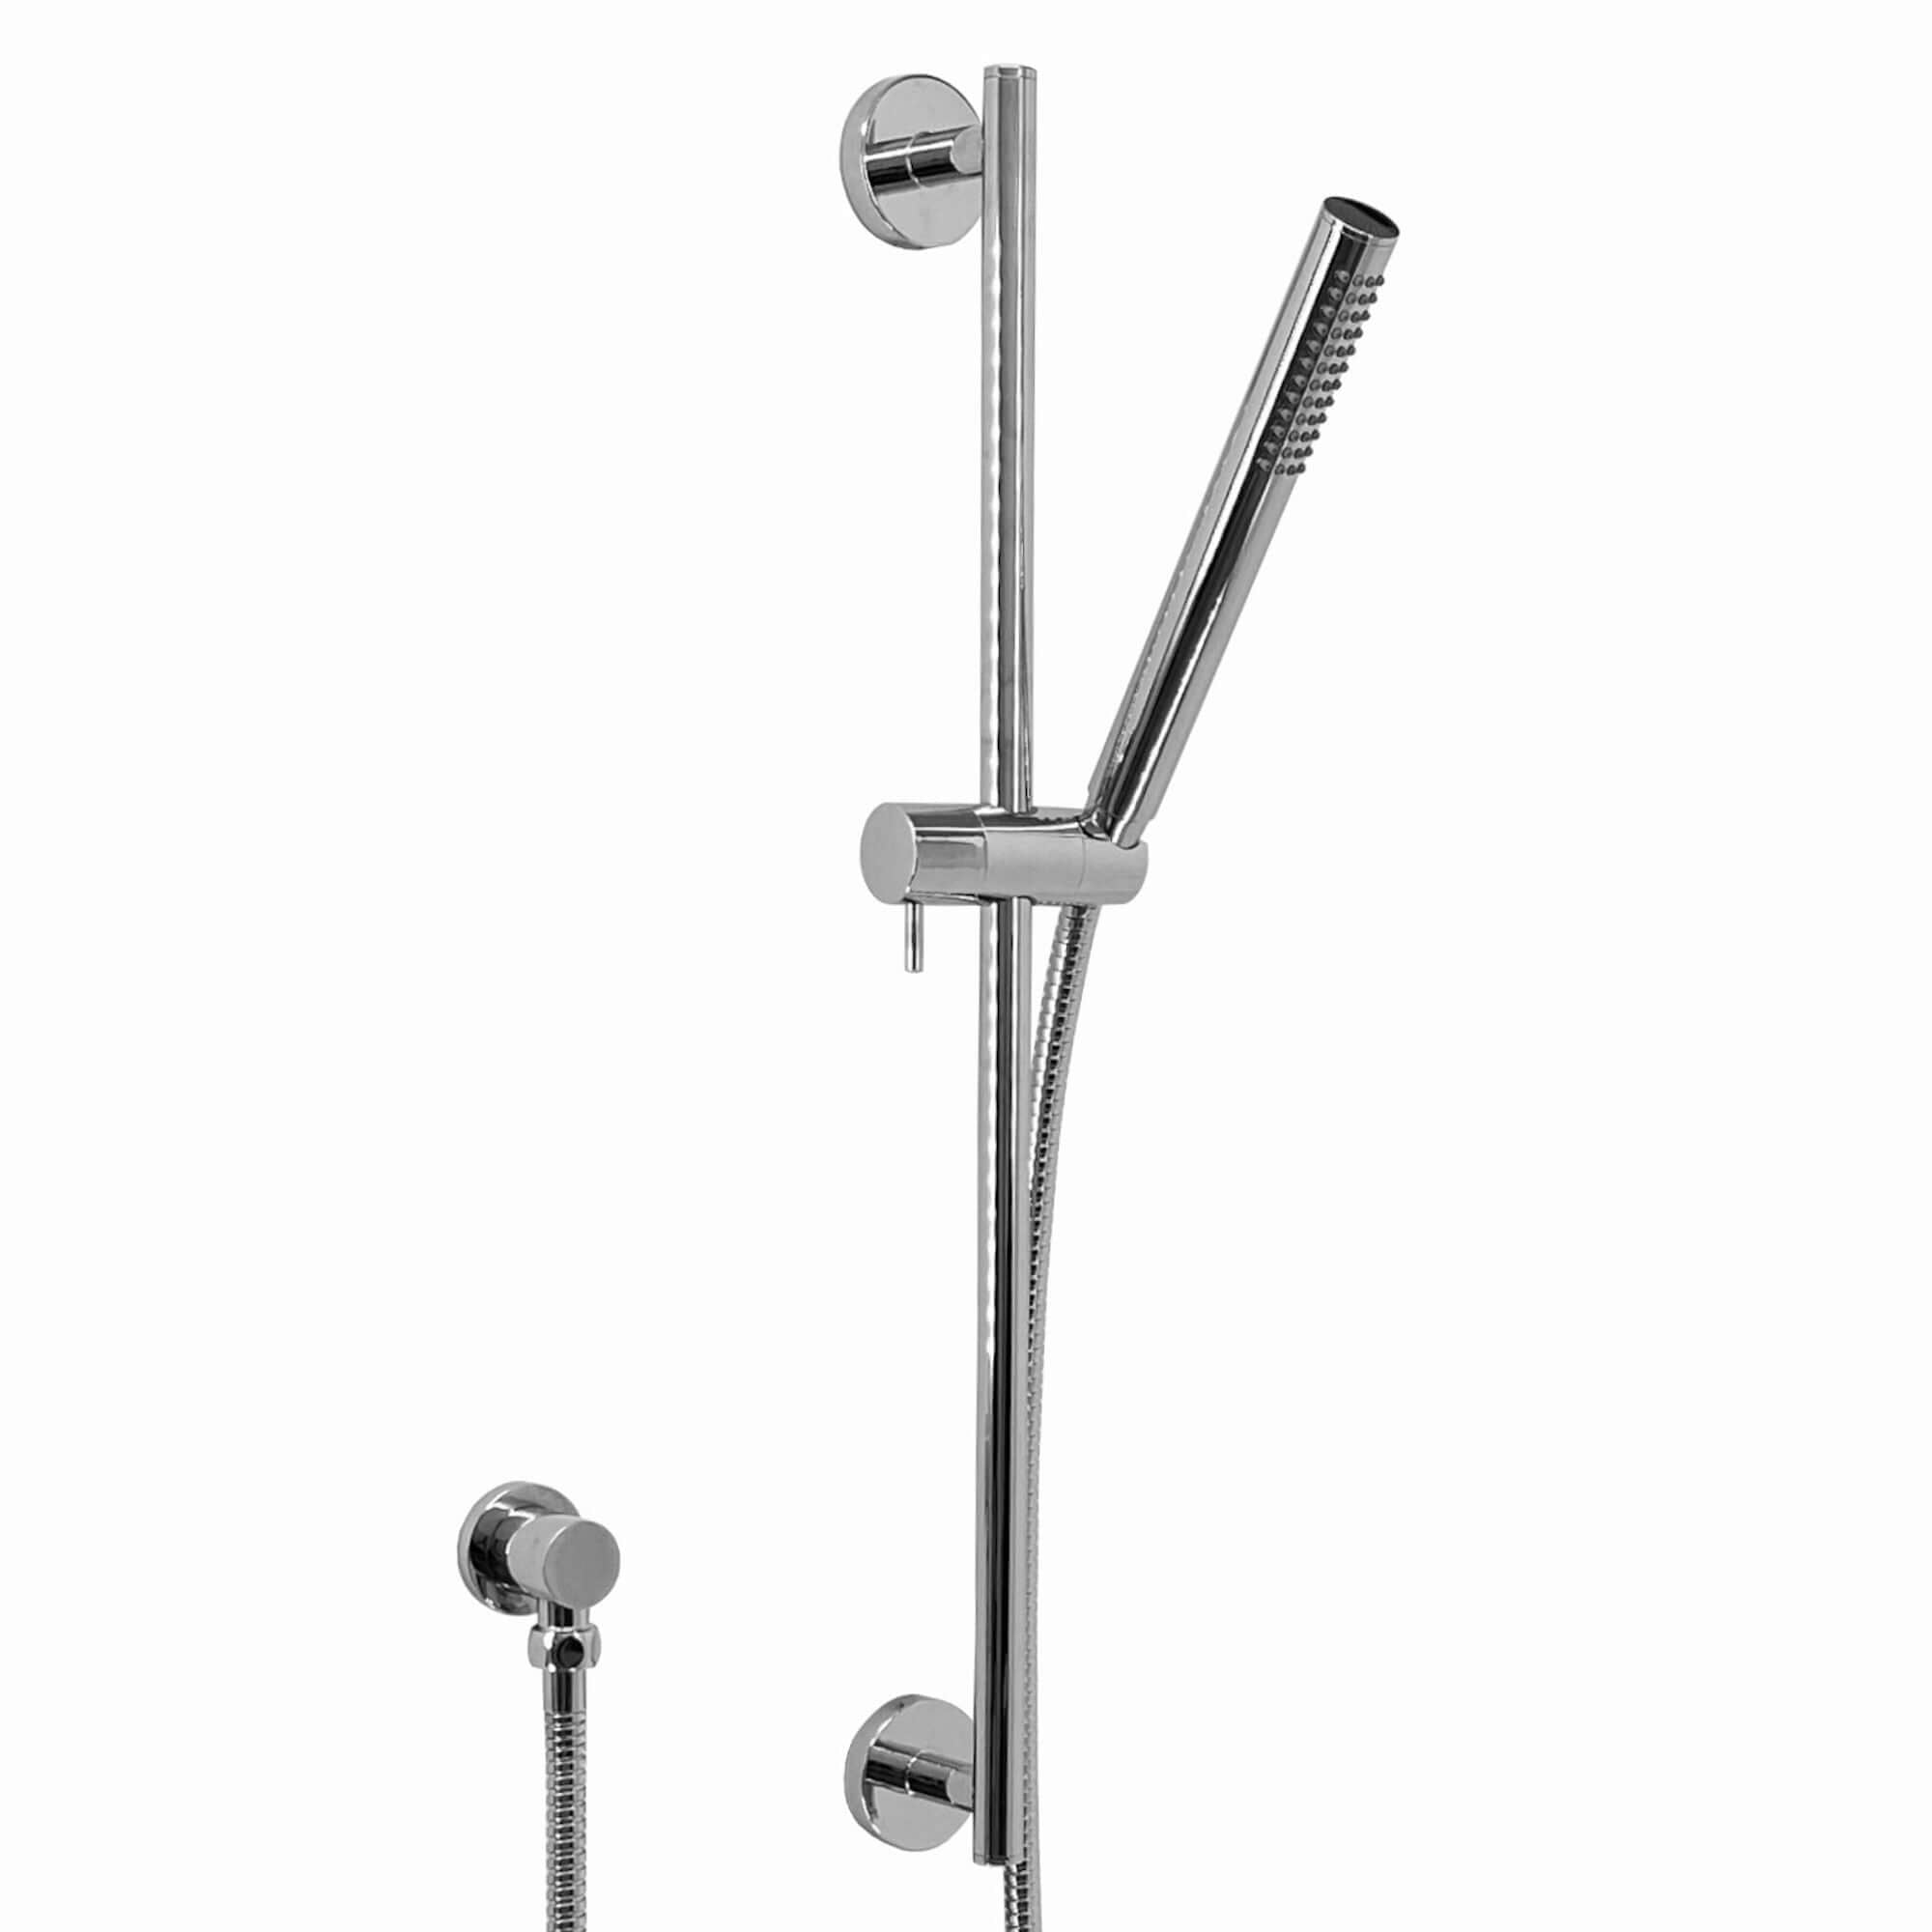 Contemporary Shower Slider Riser Rail Kit With Pencil Shower Head, Hose and Wall Elbow - Chrome - Showers